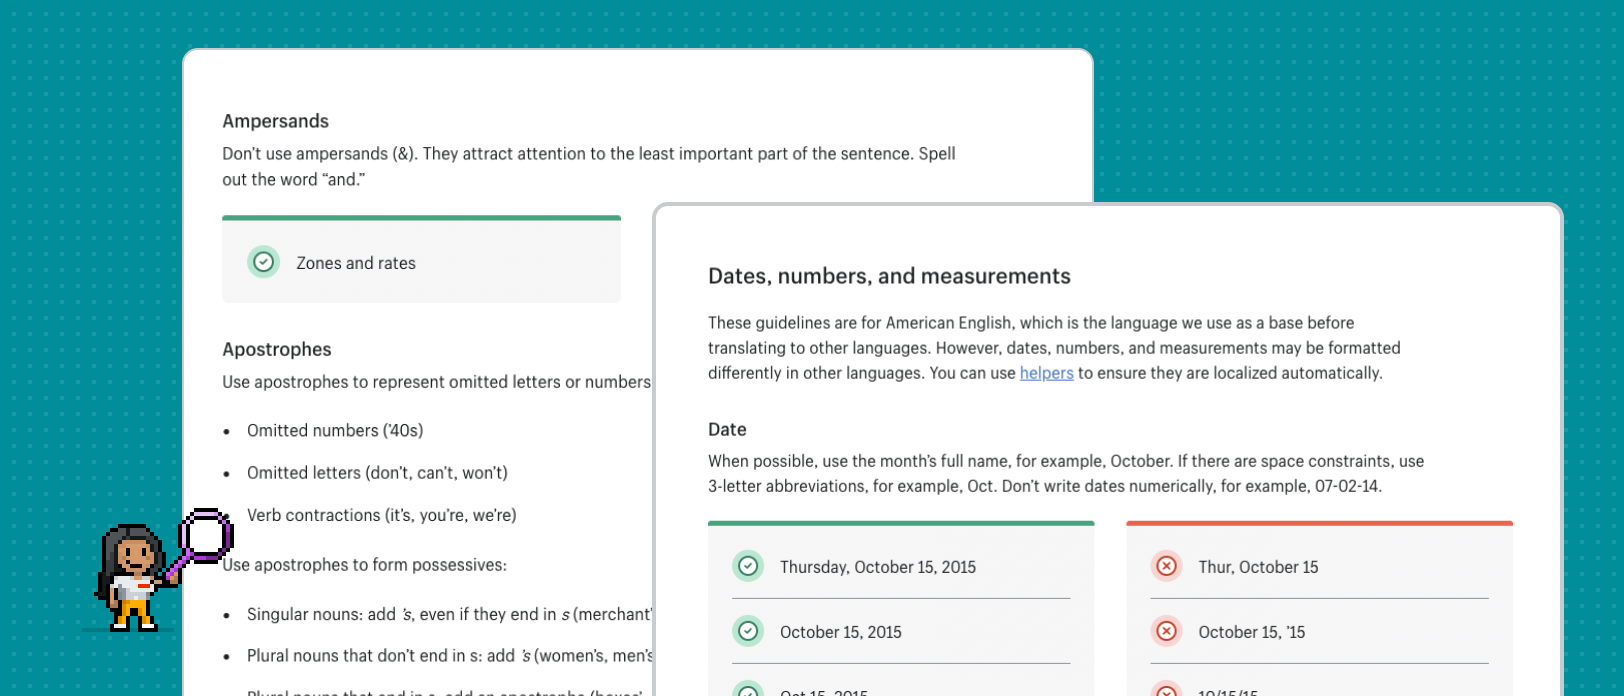 Screenshots of the Polaris grammar and mechanics page, which explain guidelines for using special characters, dates, numbers, and measurements.